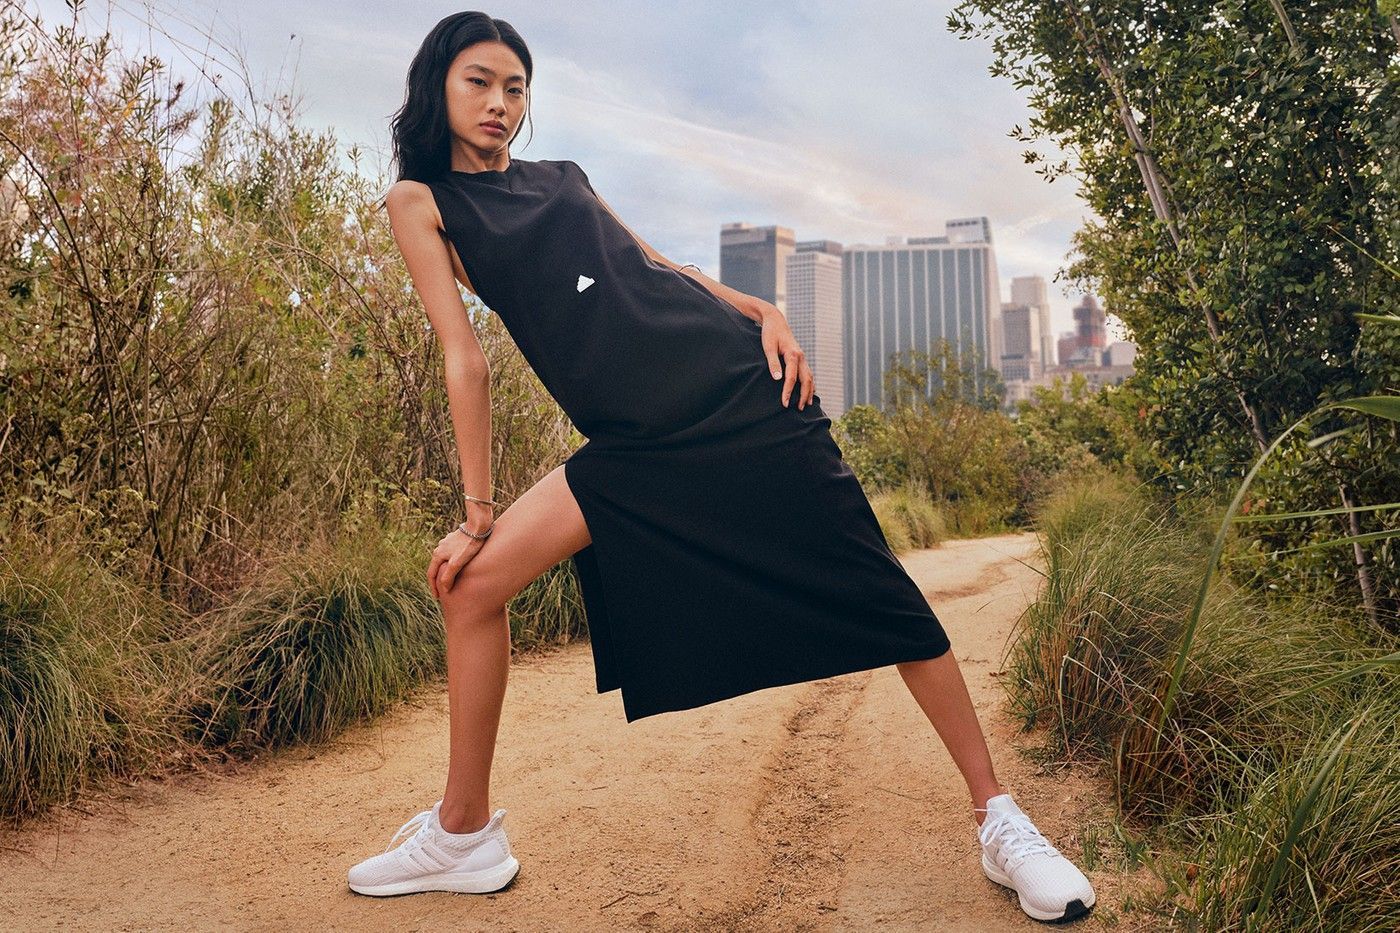 Squid Game Star Ho Yeon Jung Fronts New Adidas Campaign - PAPER